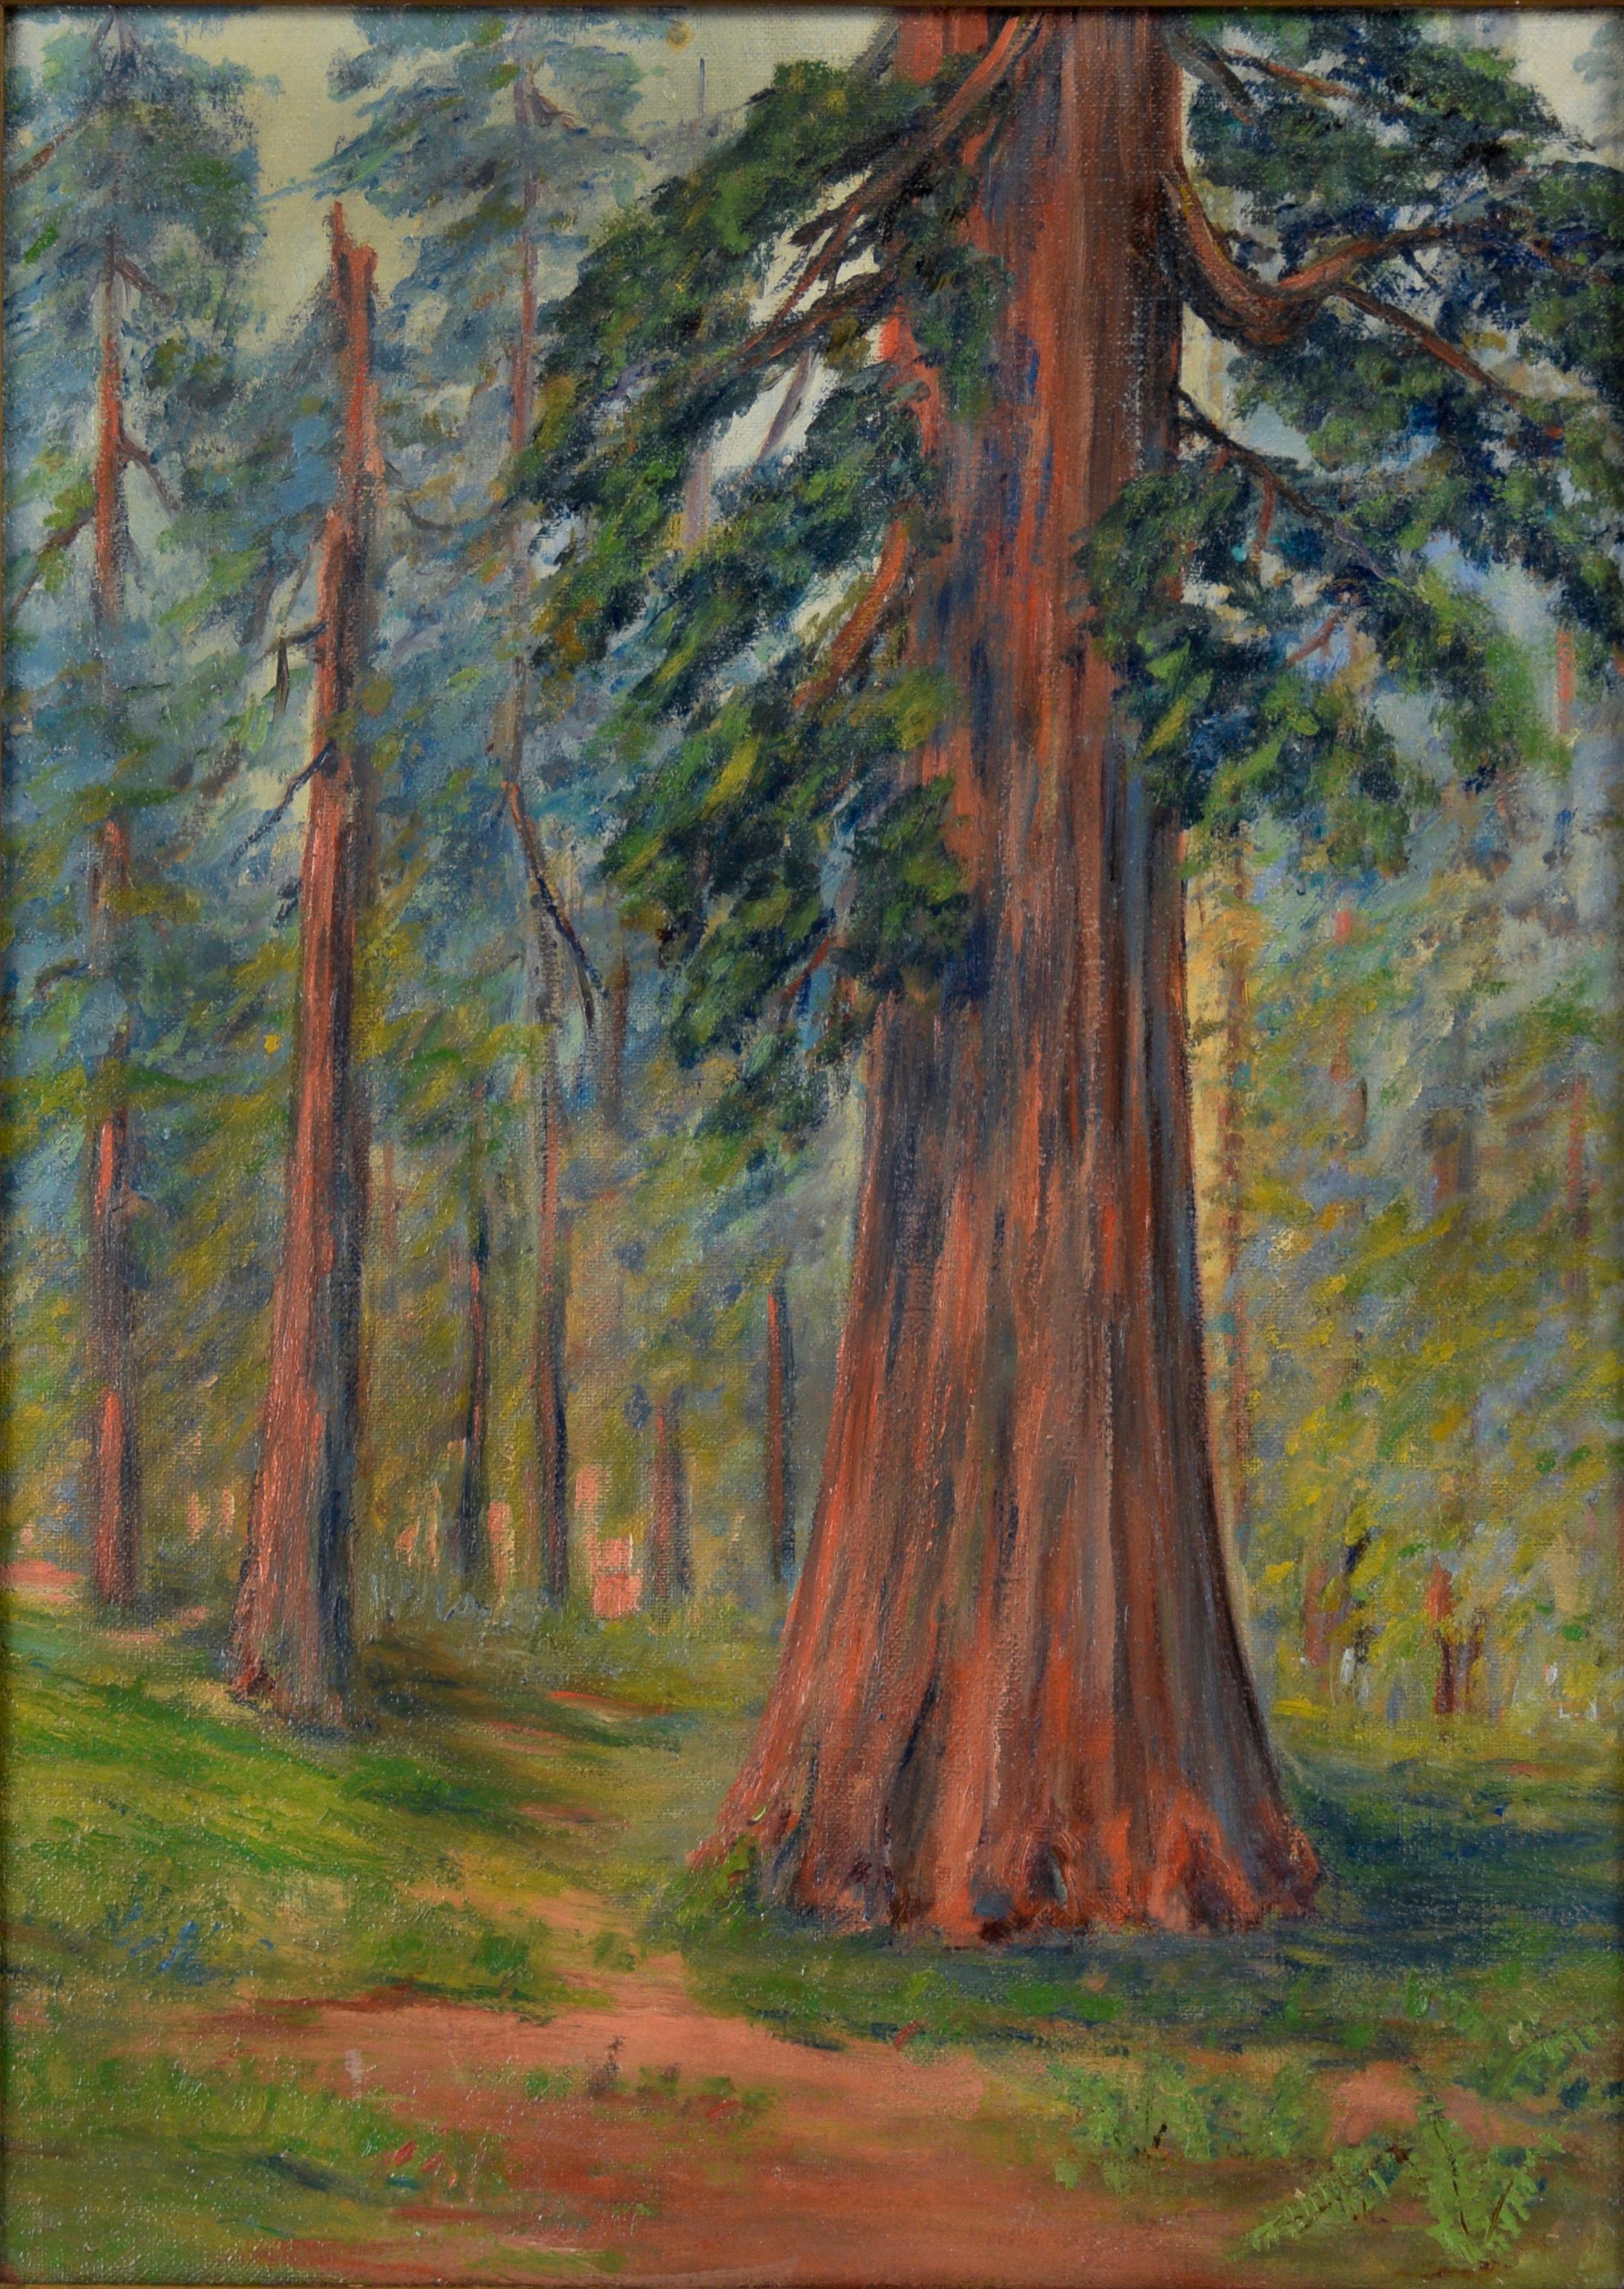 Through The Redwoods - California Impressionism Circa 1930s - Painting by California School